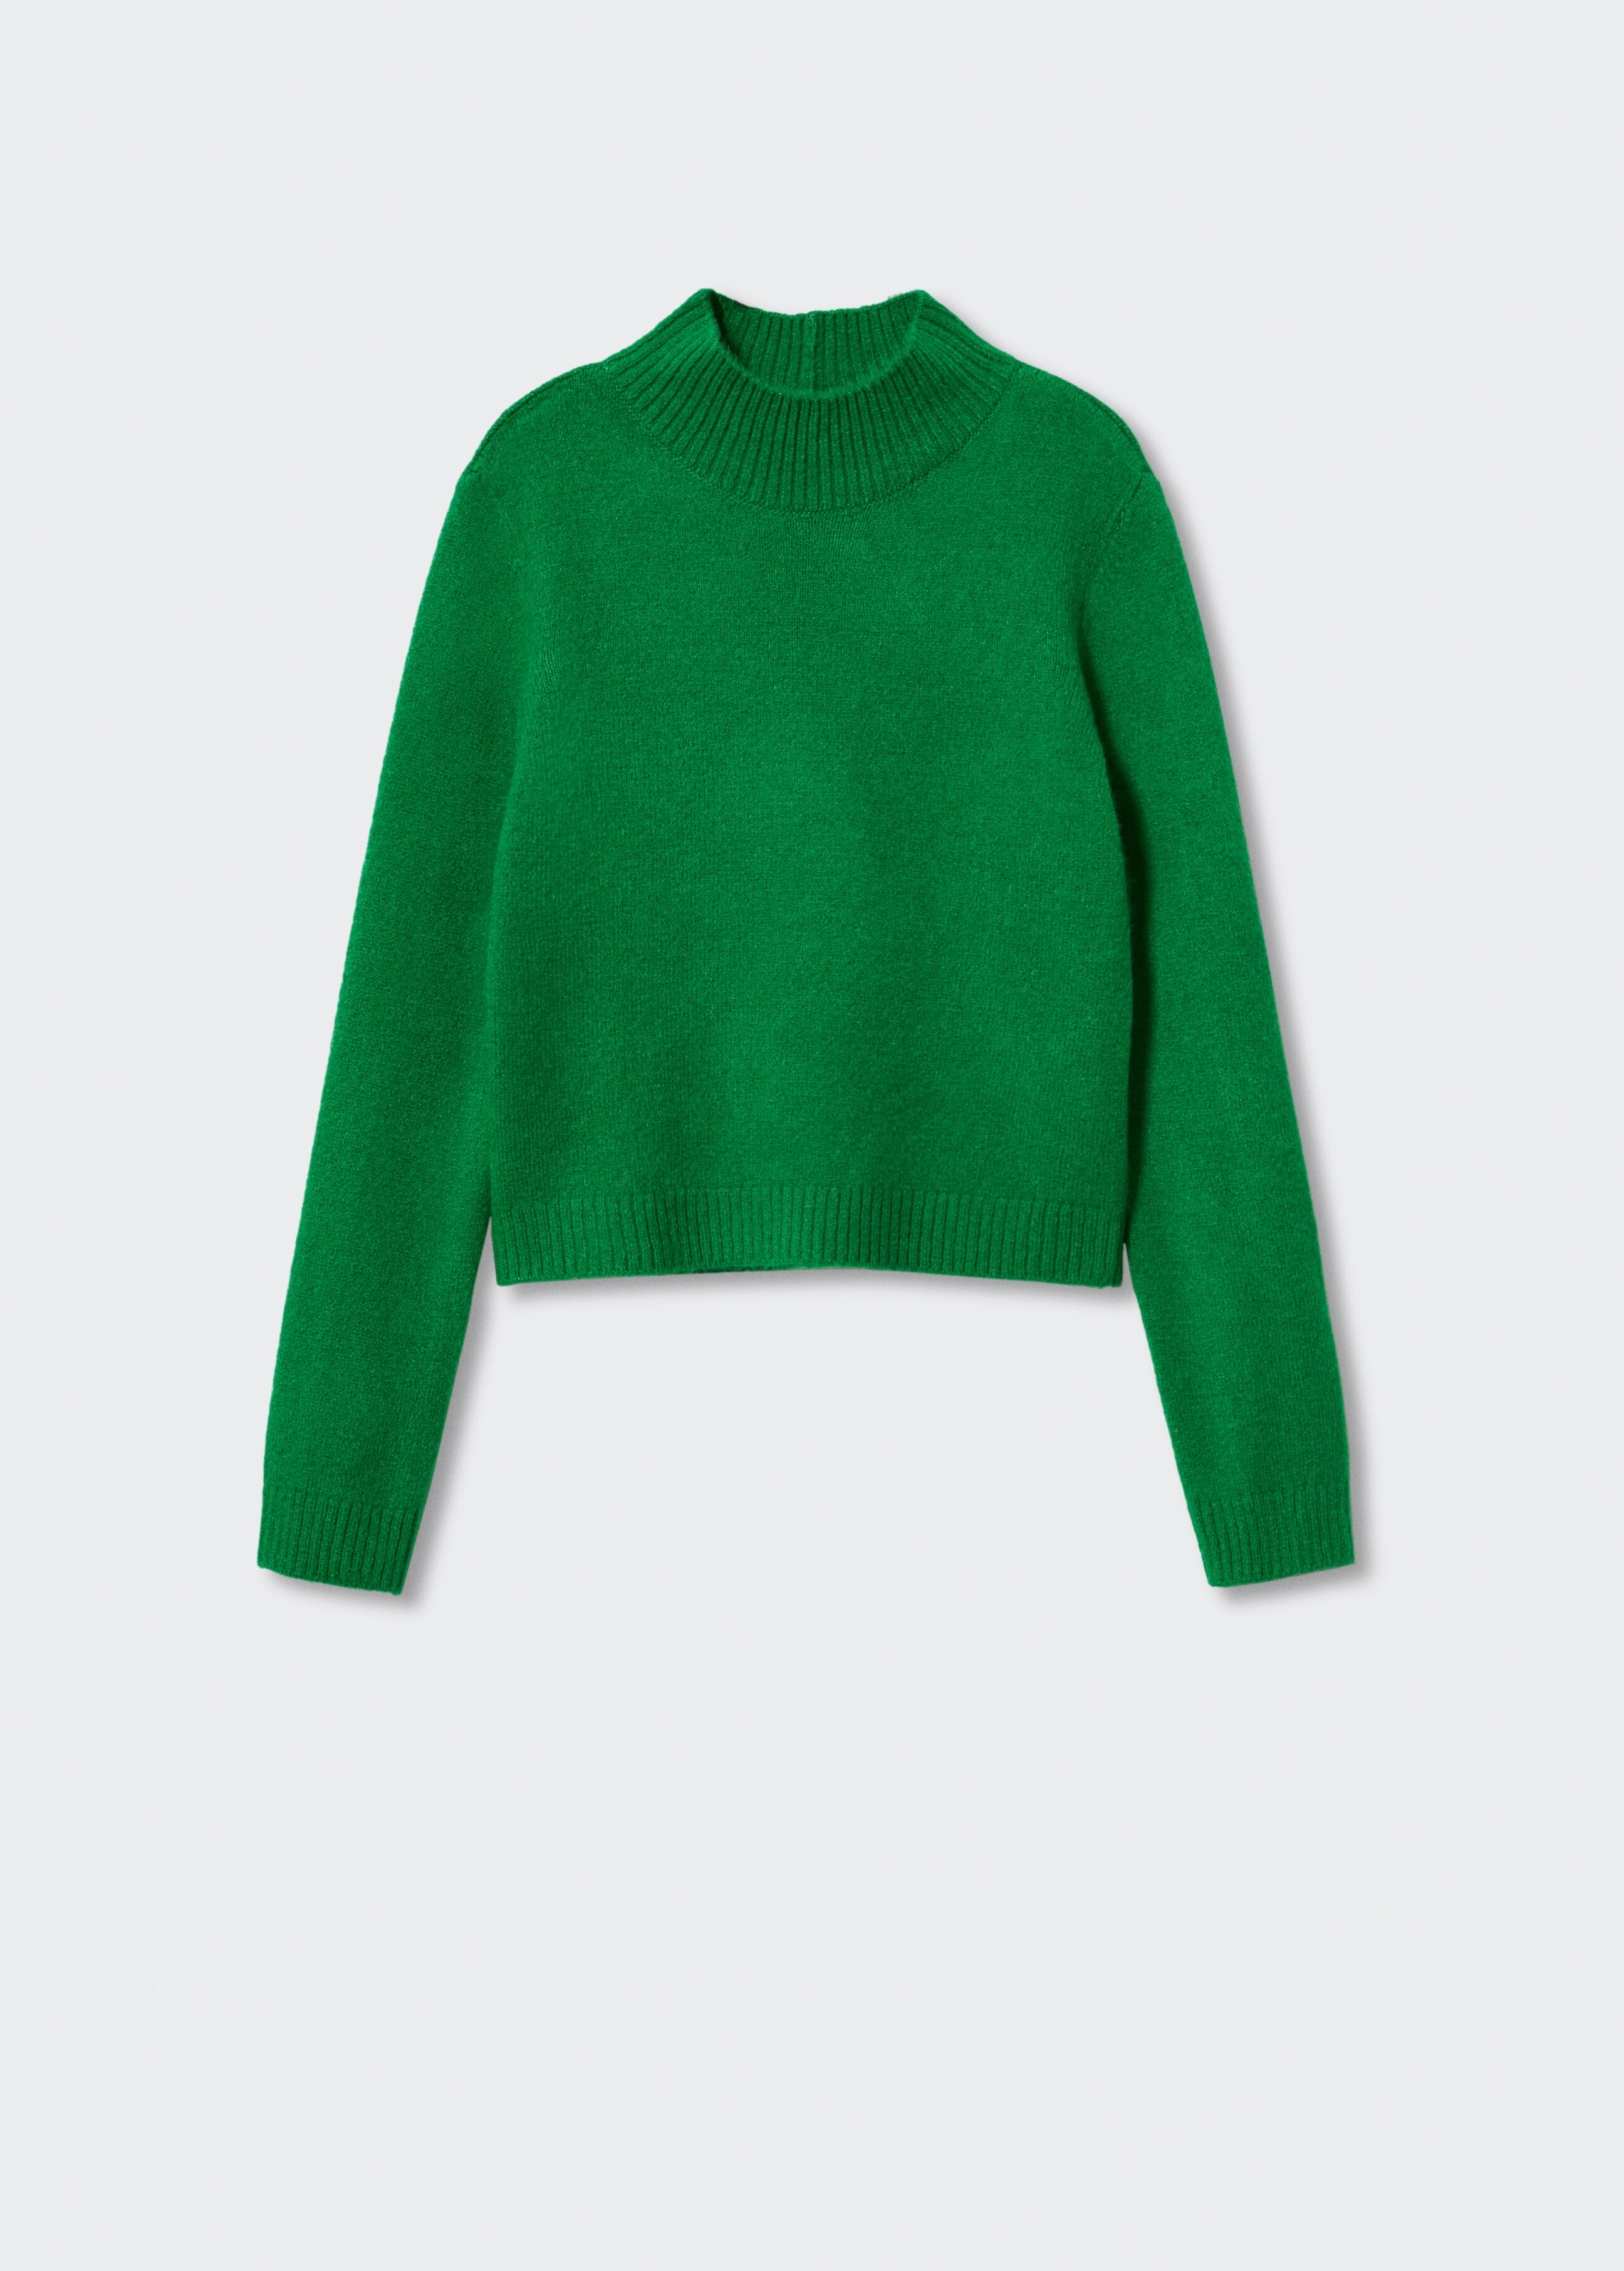 High collar sweater - Article without model